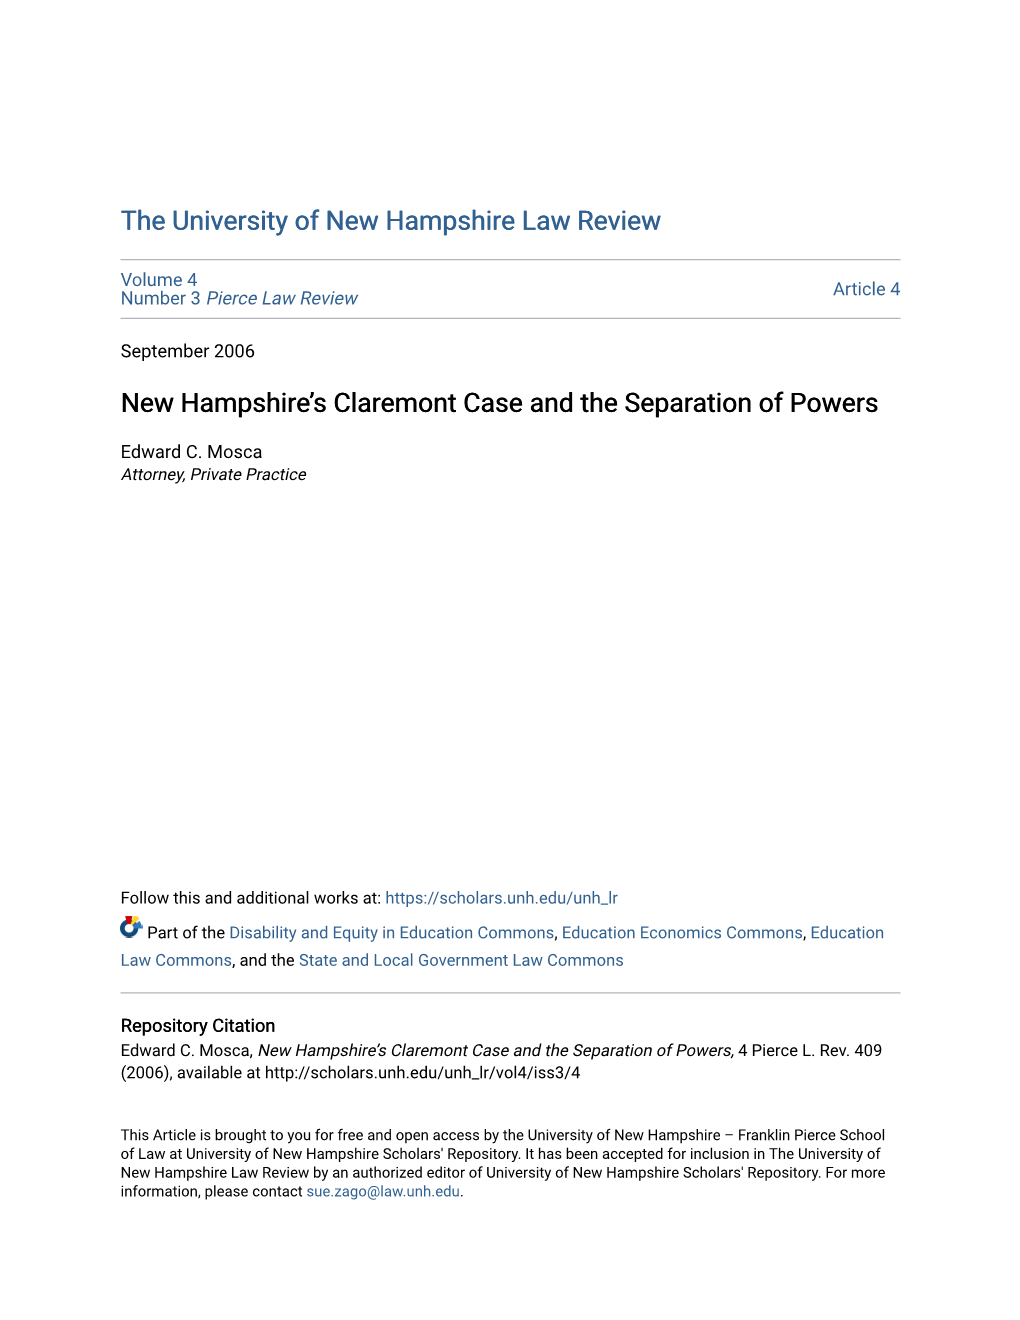 New Hampshire's Claremont Case and the Separation of Powers